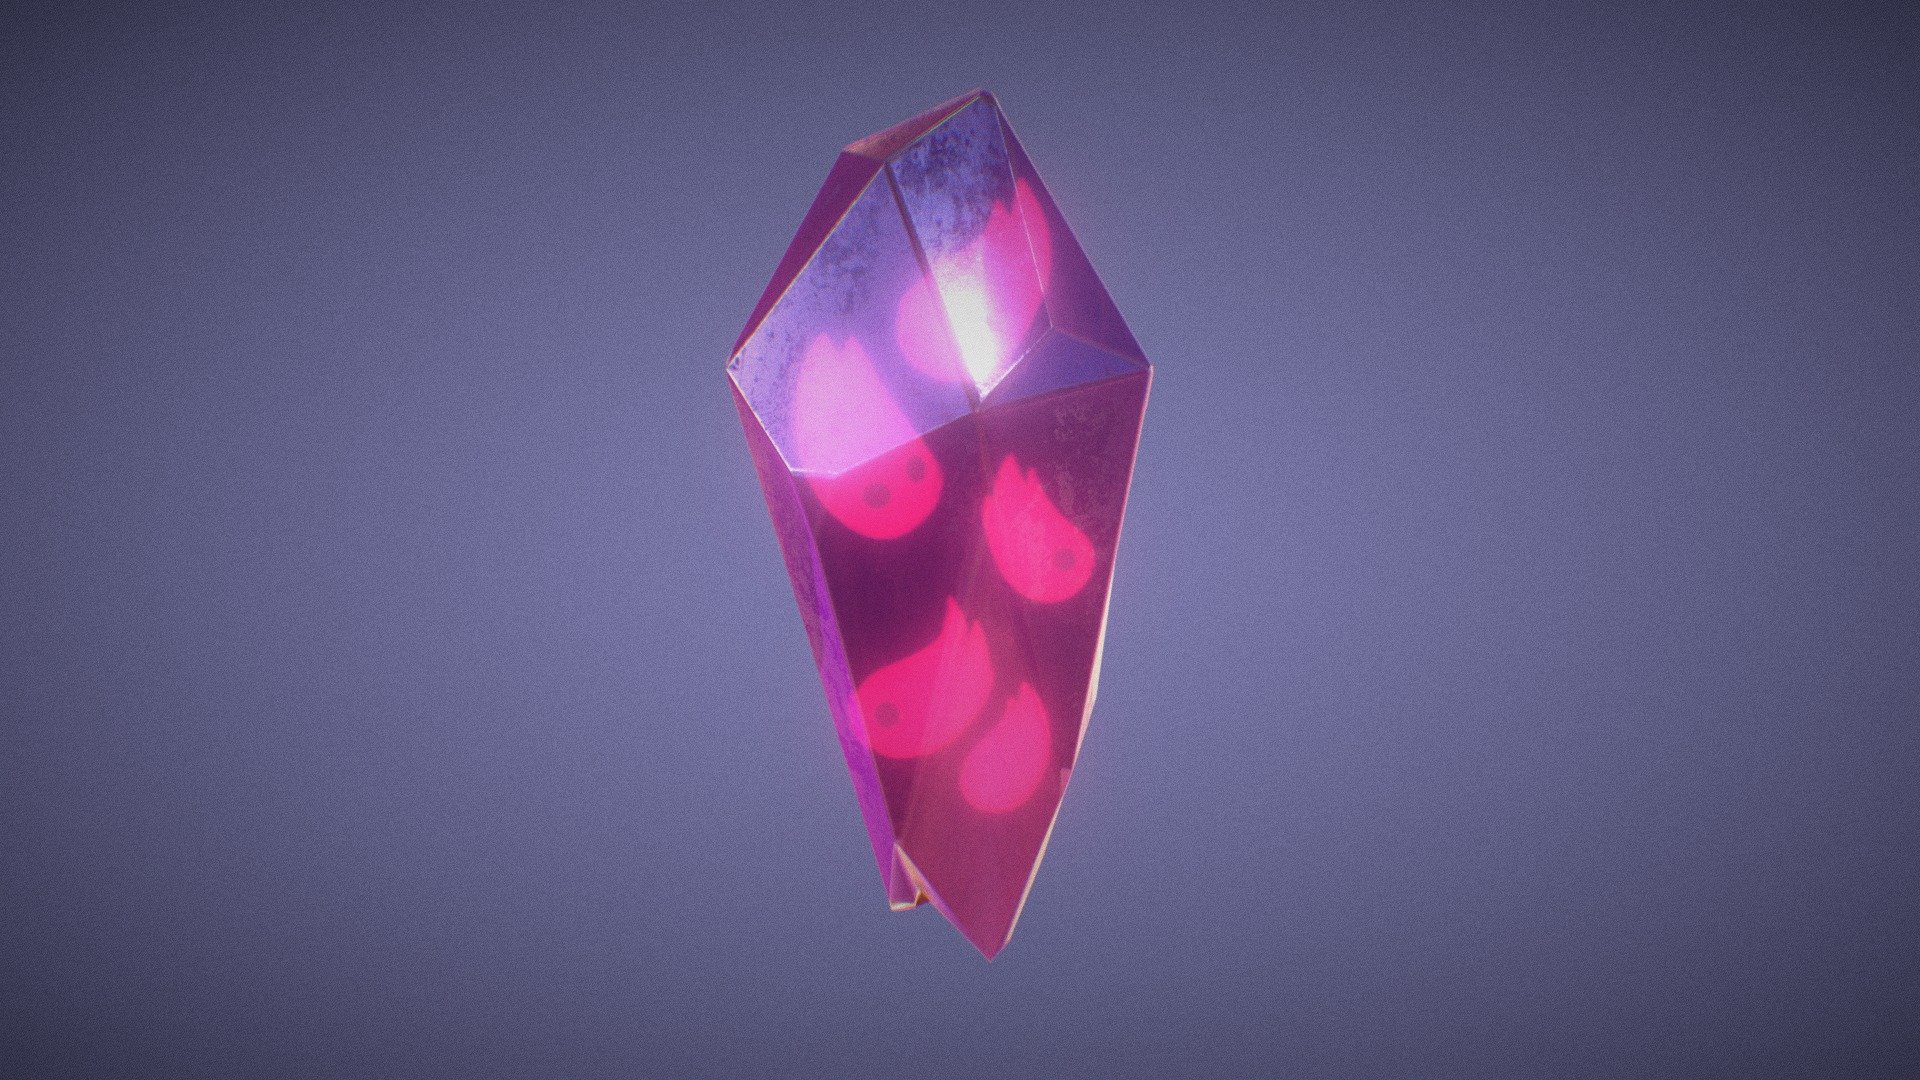 Stylized Crystal, based on some of my 2d work. Modeled in Blender, textured in Substance Painter 3d model